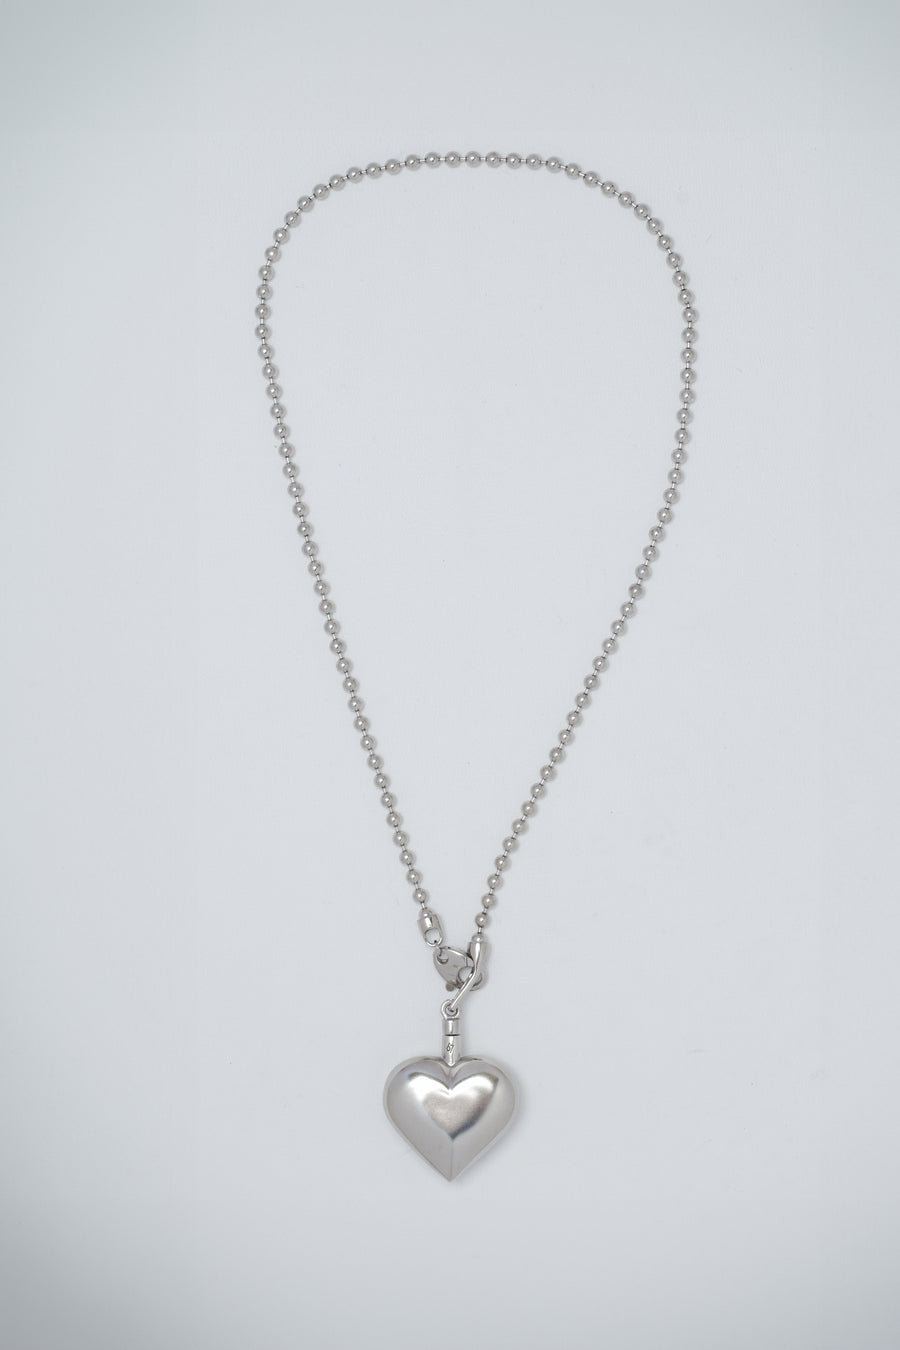 The Heart Necklace II